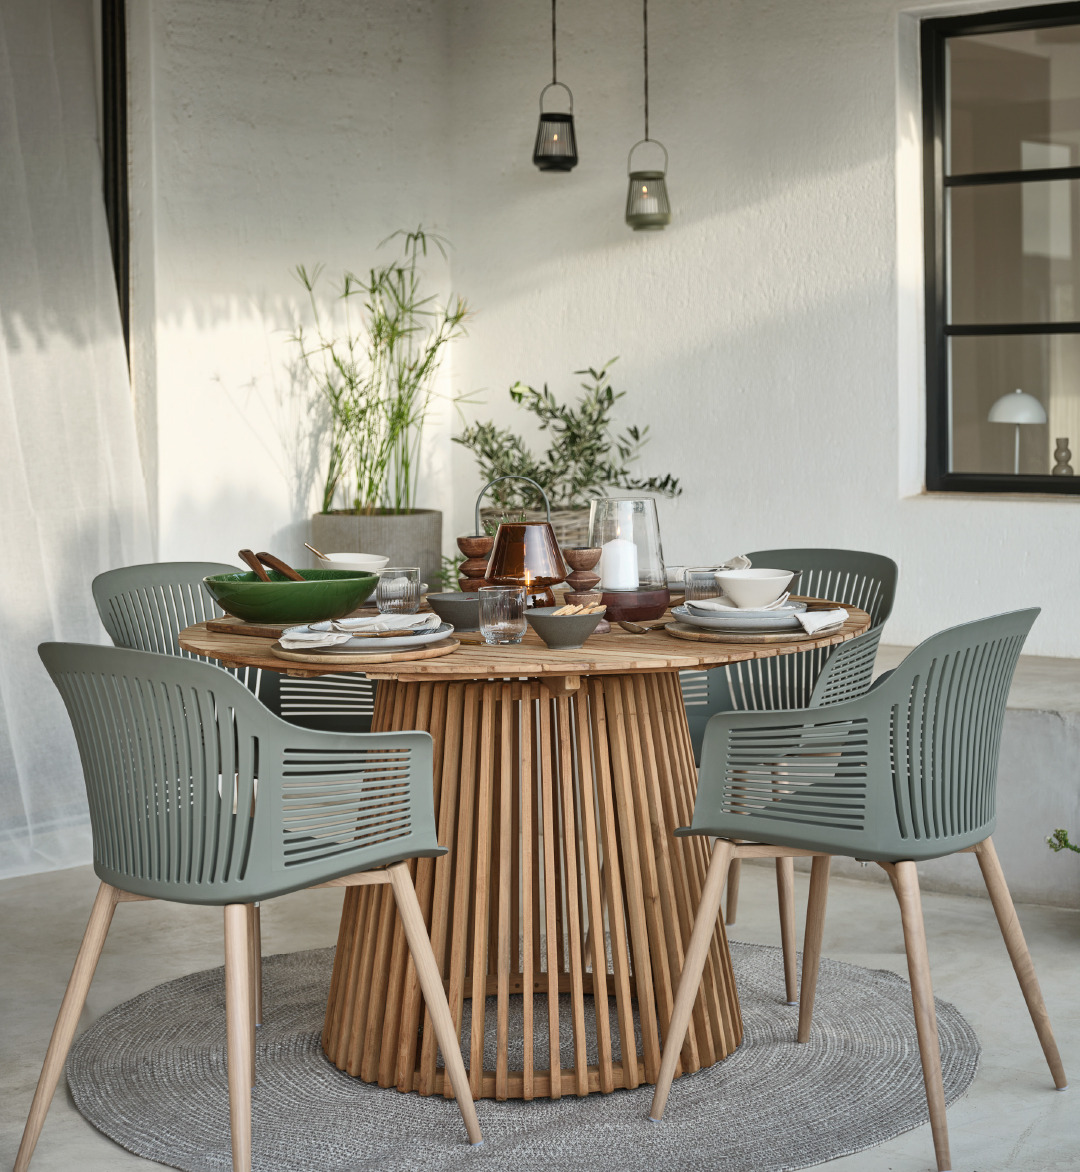 Wooden garden table with green chairs